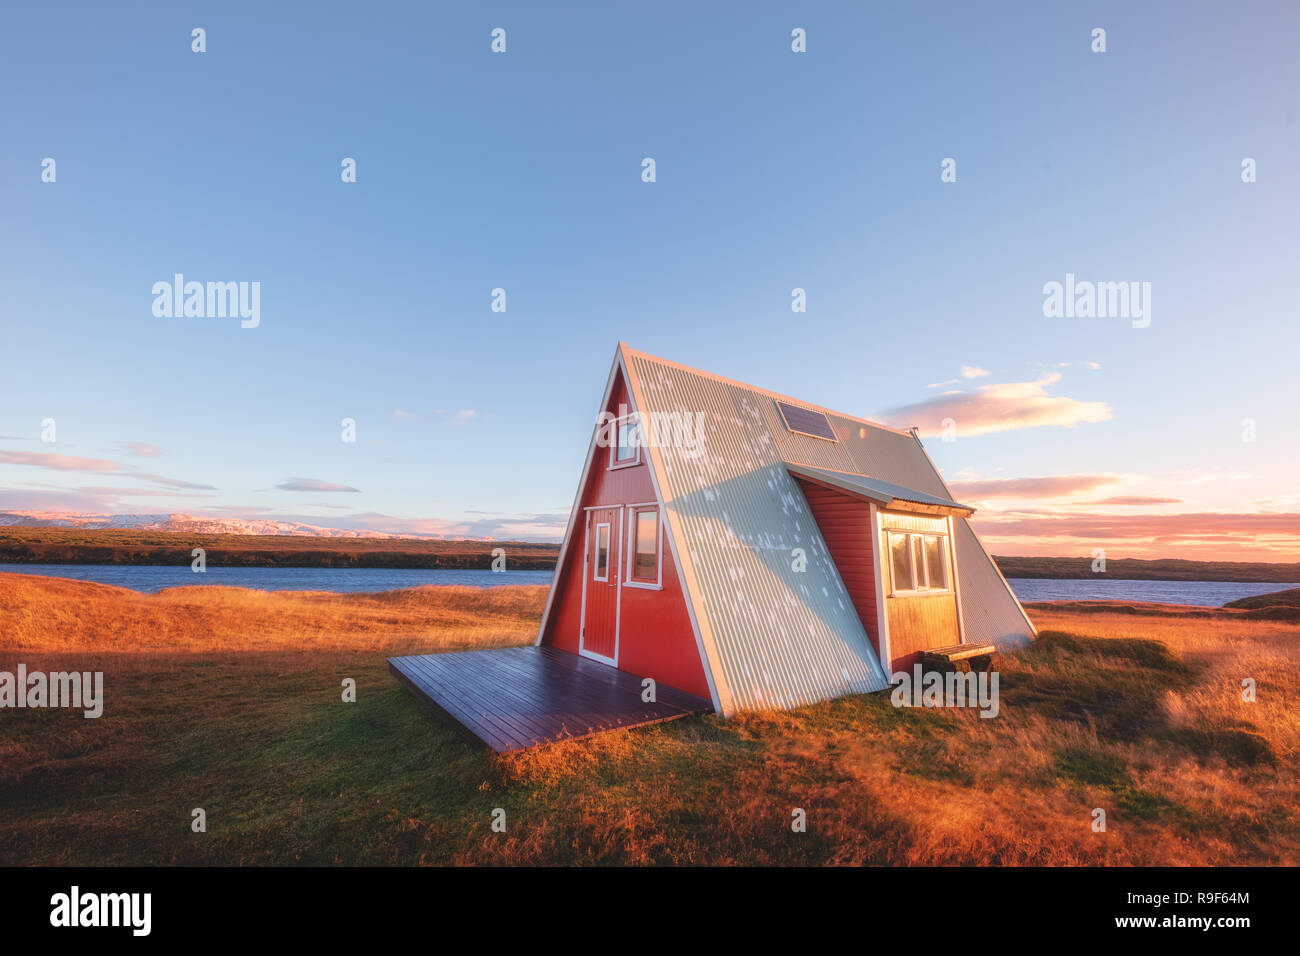 Cute triangle little house cabin red Iceland Icelandic Stock Photo